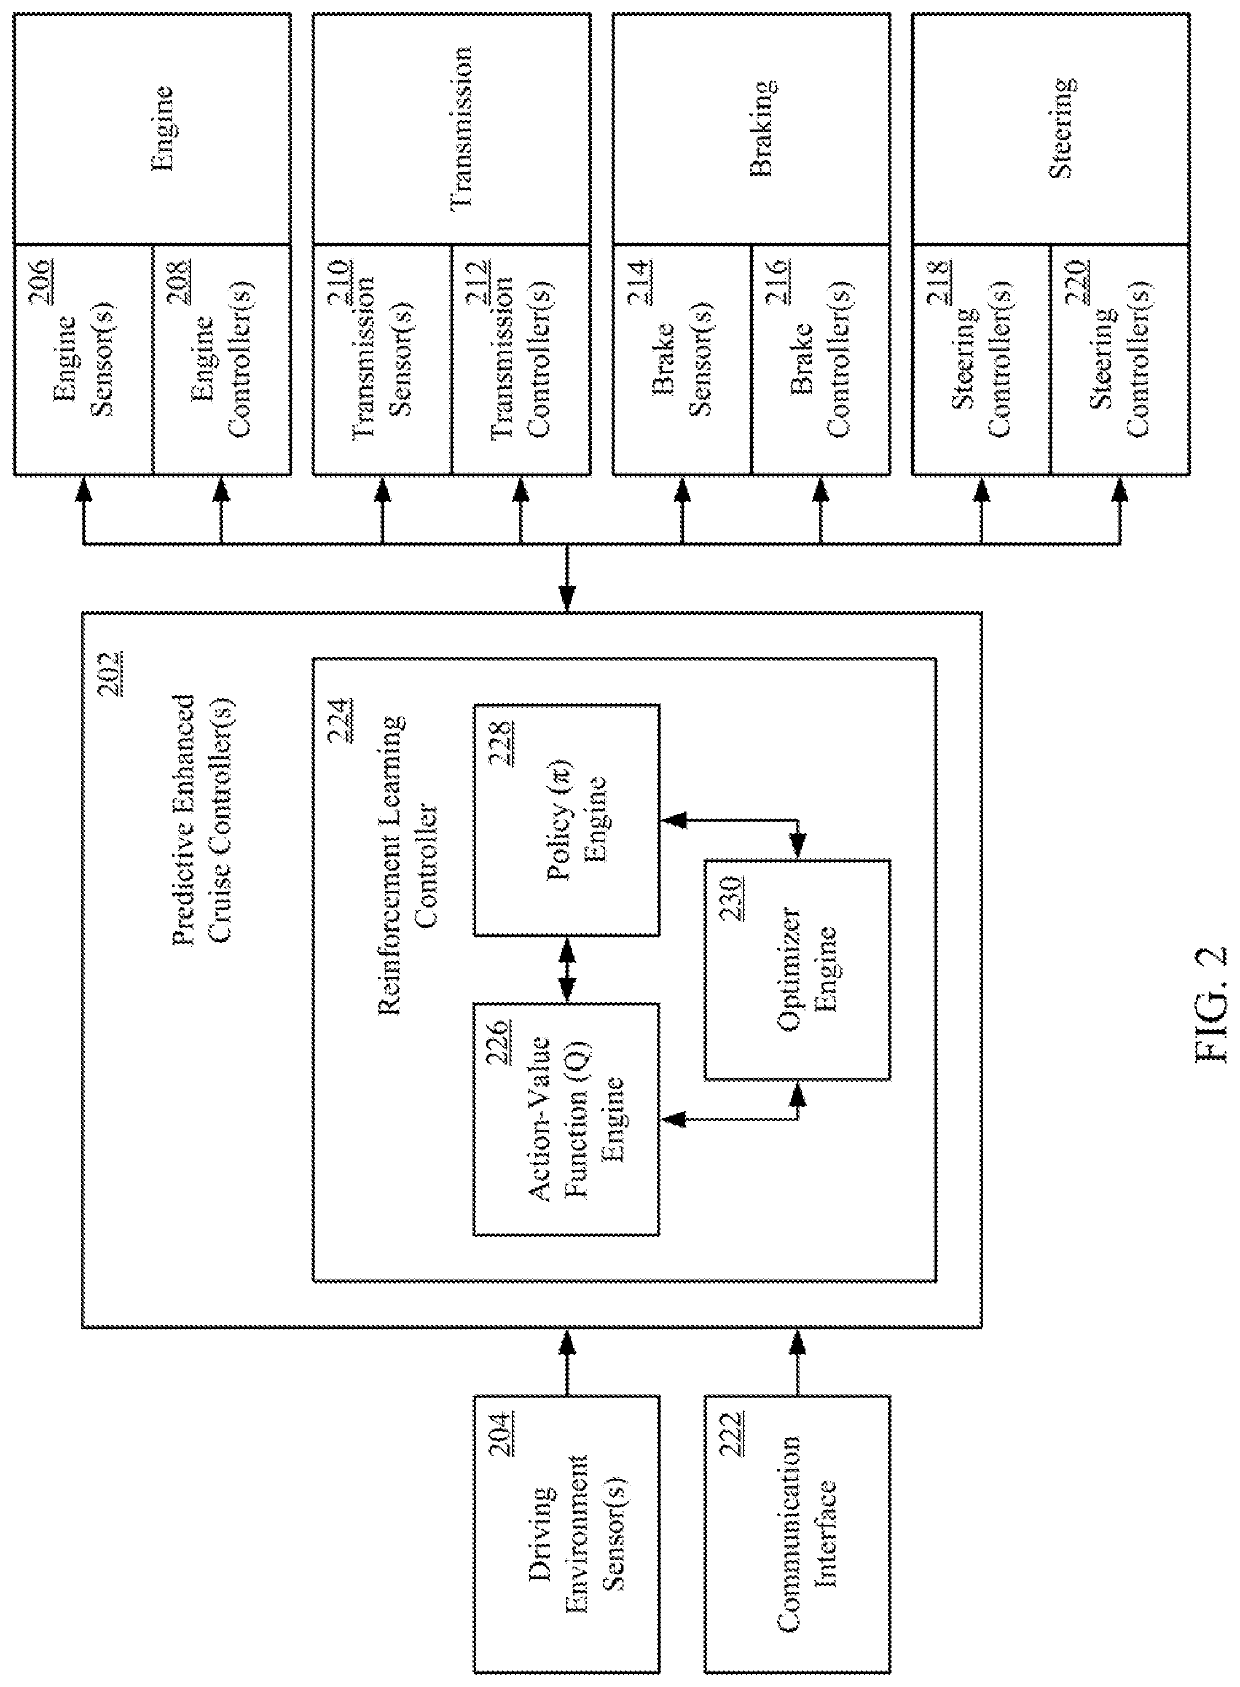 Pre-Training of a Reinforcement Learning Ground Vehicle Controller Using Monte Carlo Simulation